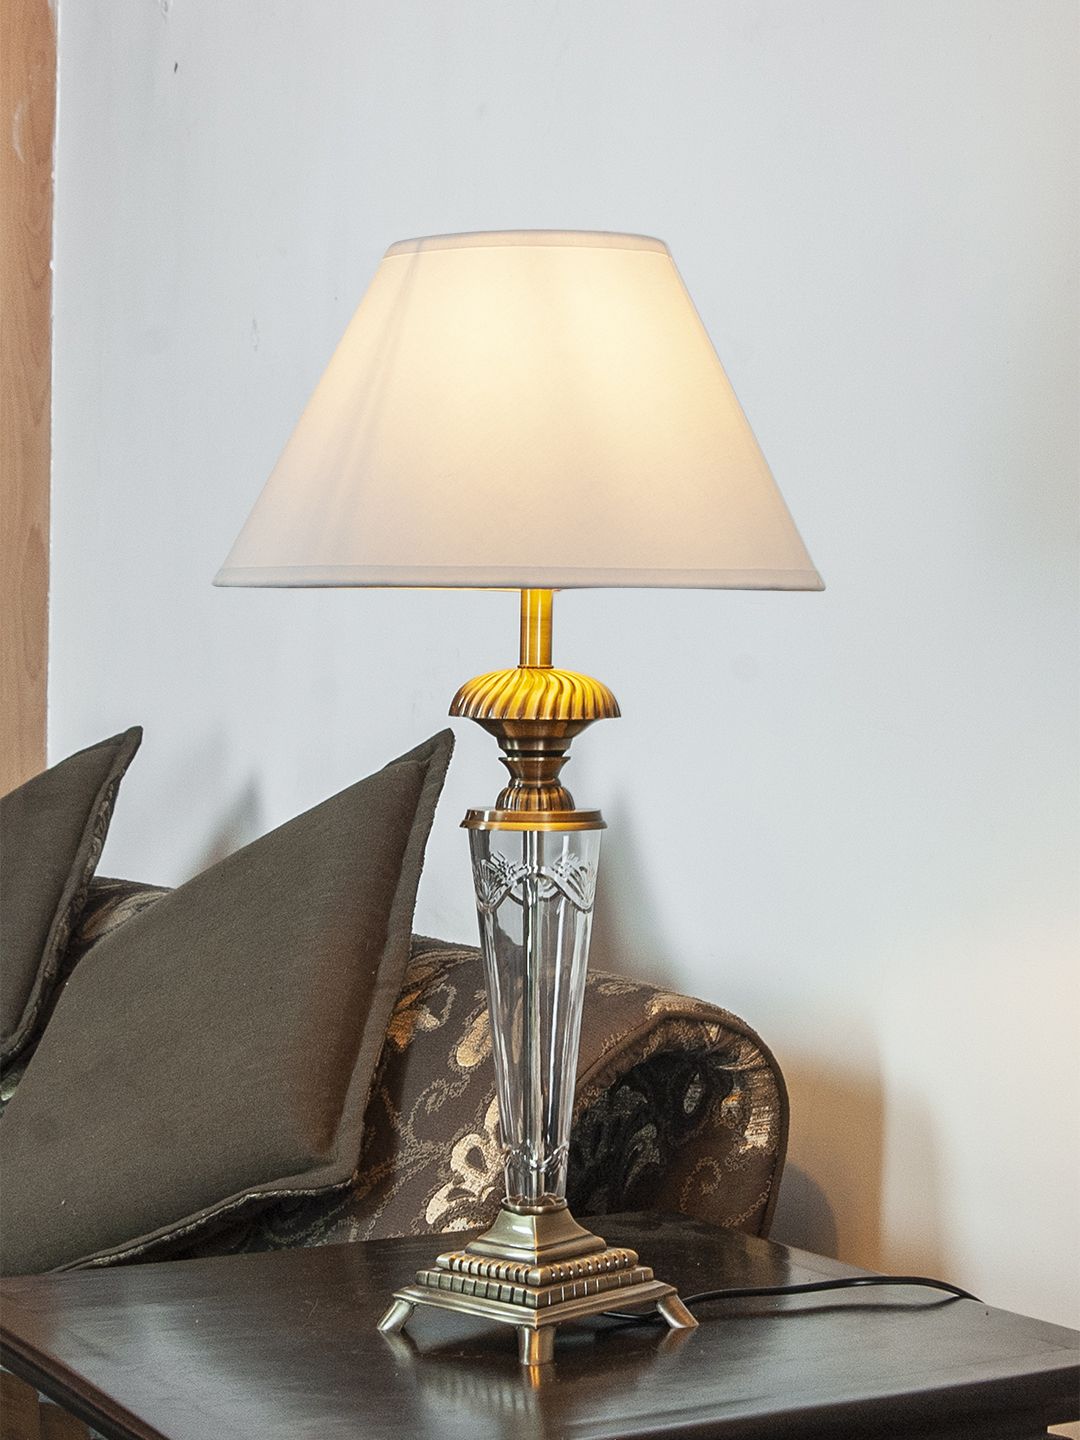 THE LIGHT STORE Gold-Toned & Off-White Self Design Bedside Table Lamp with Shade Price in India